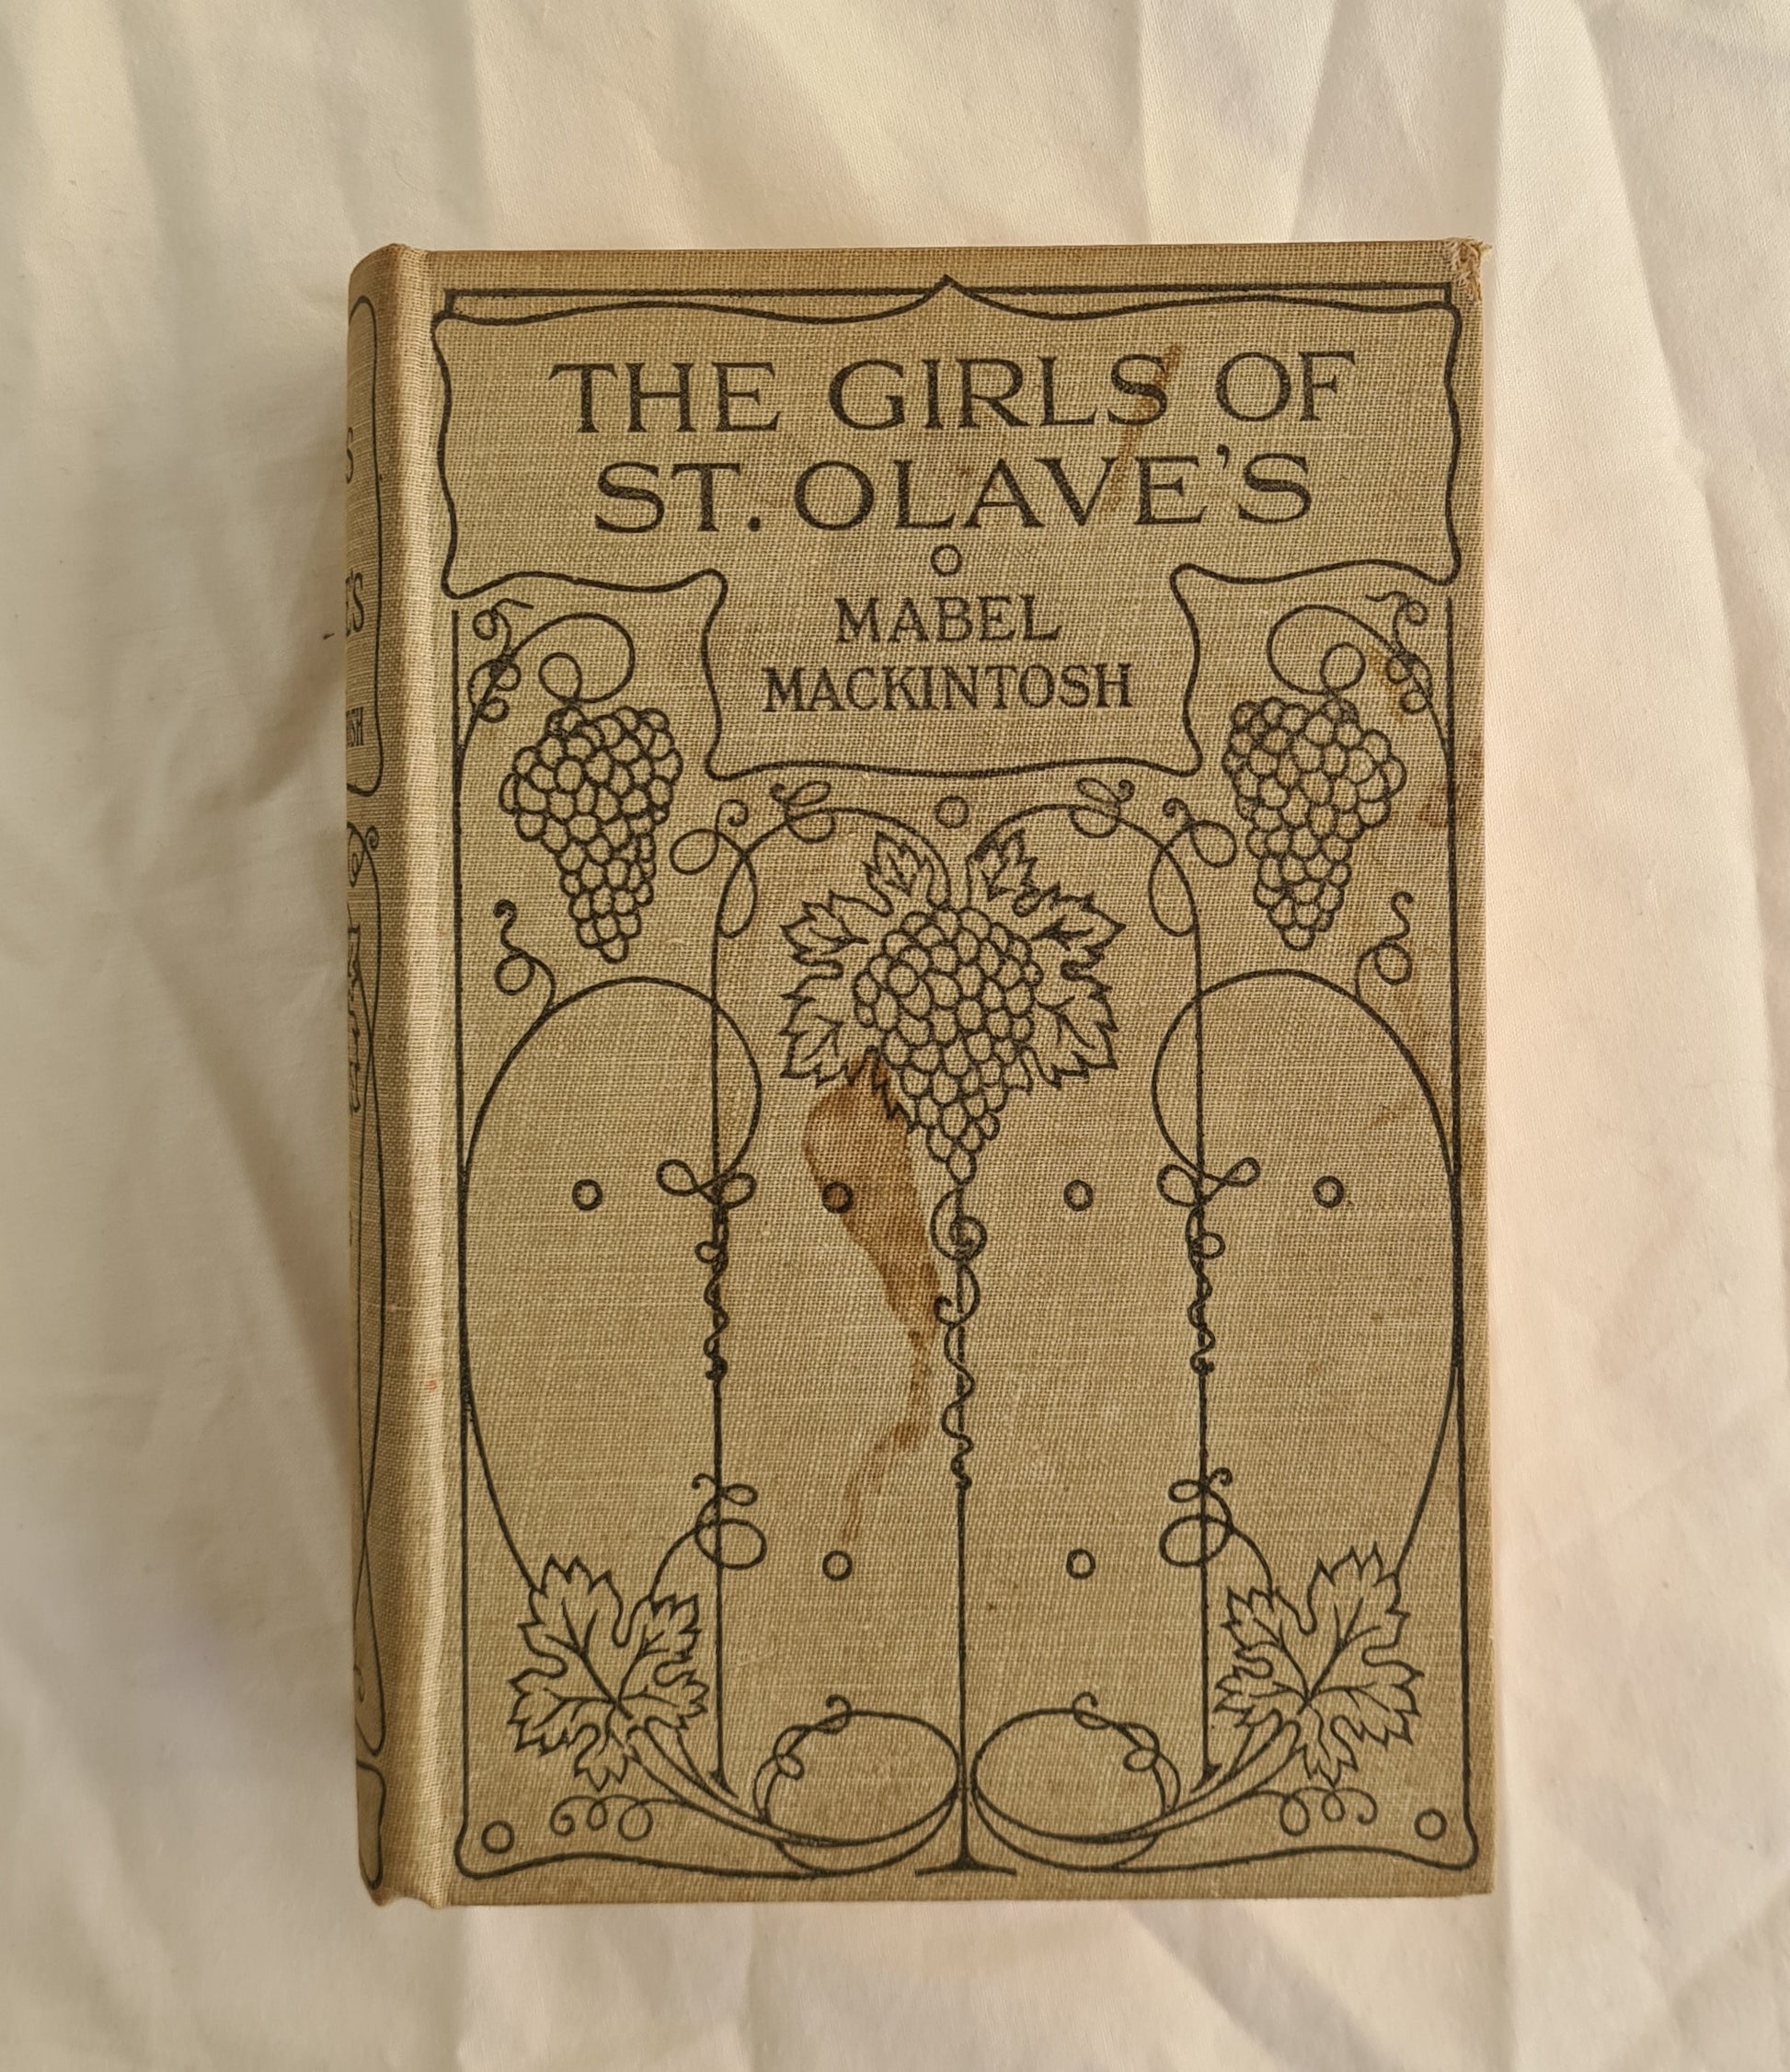 The Girls of St. Olave’s by Mable Macintosh